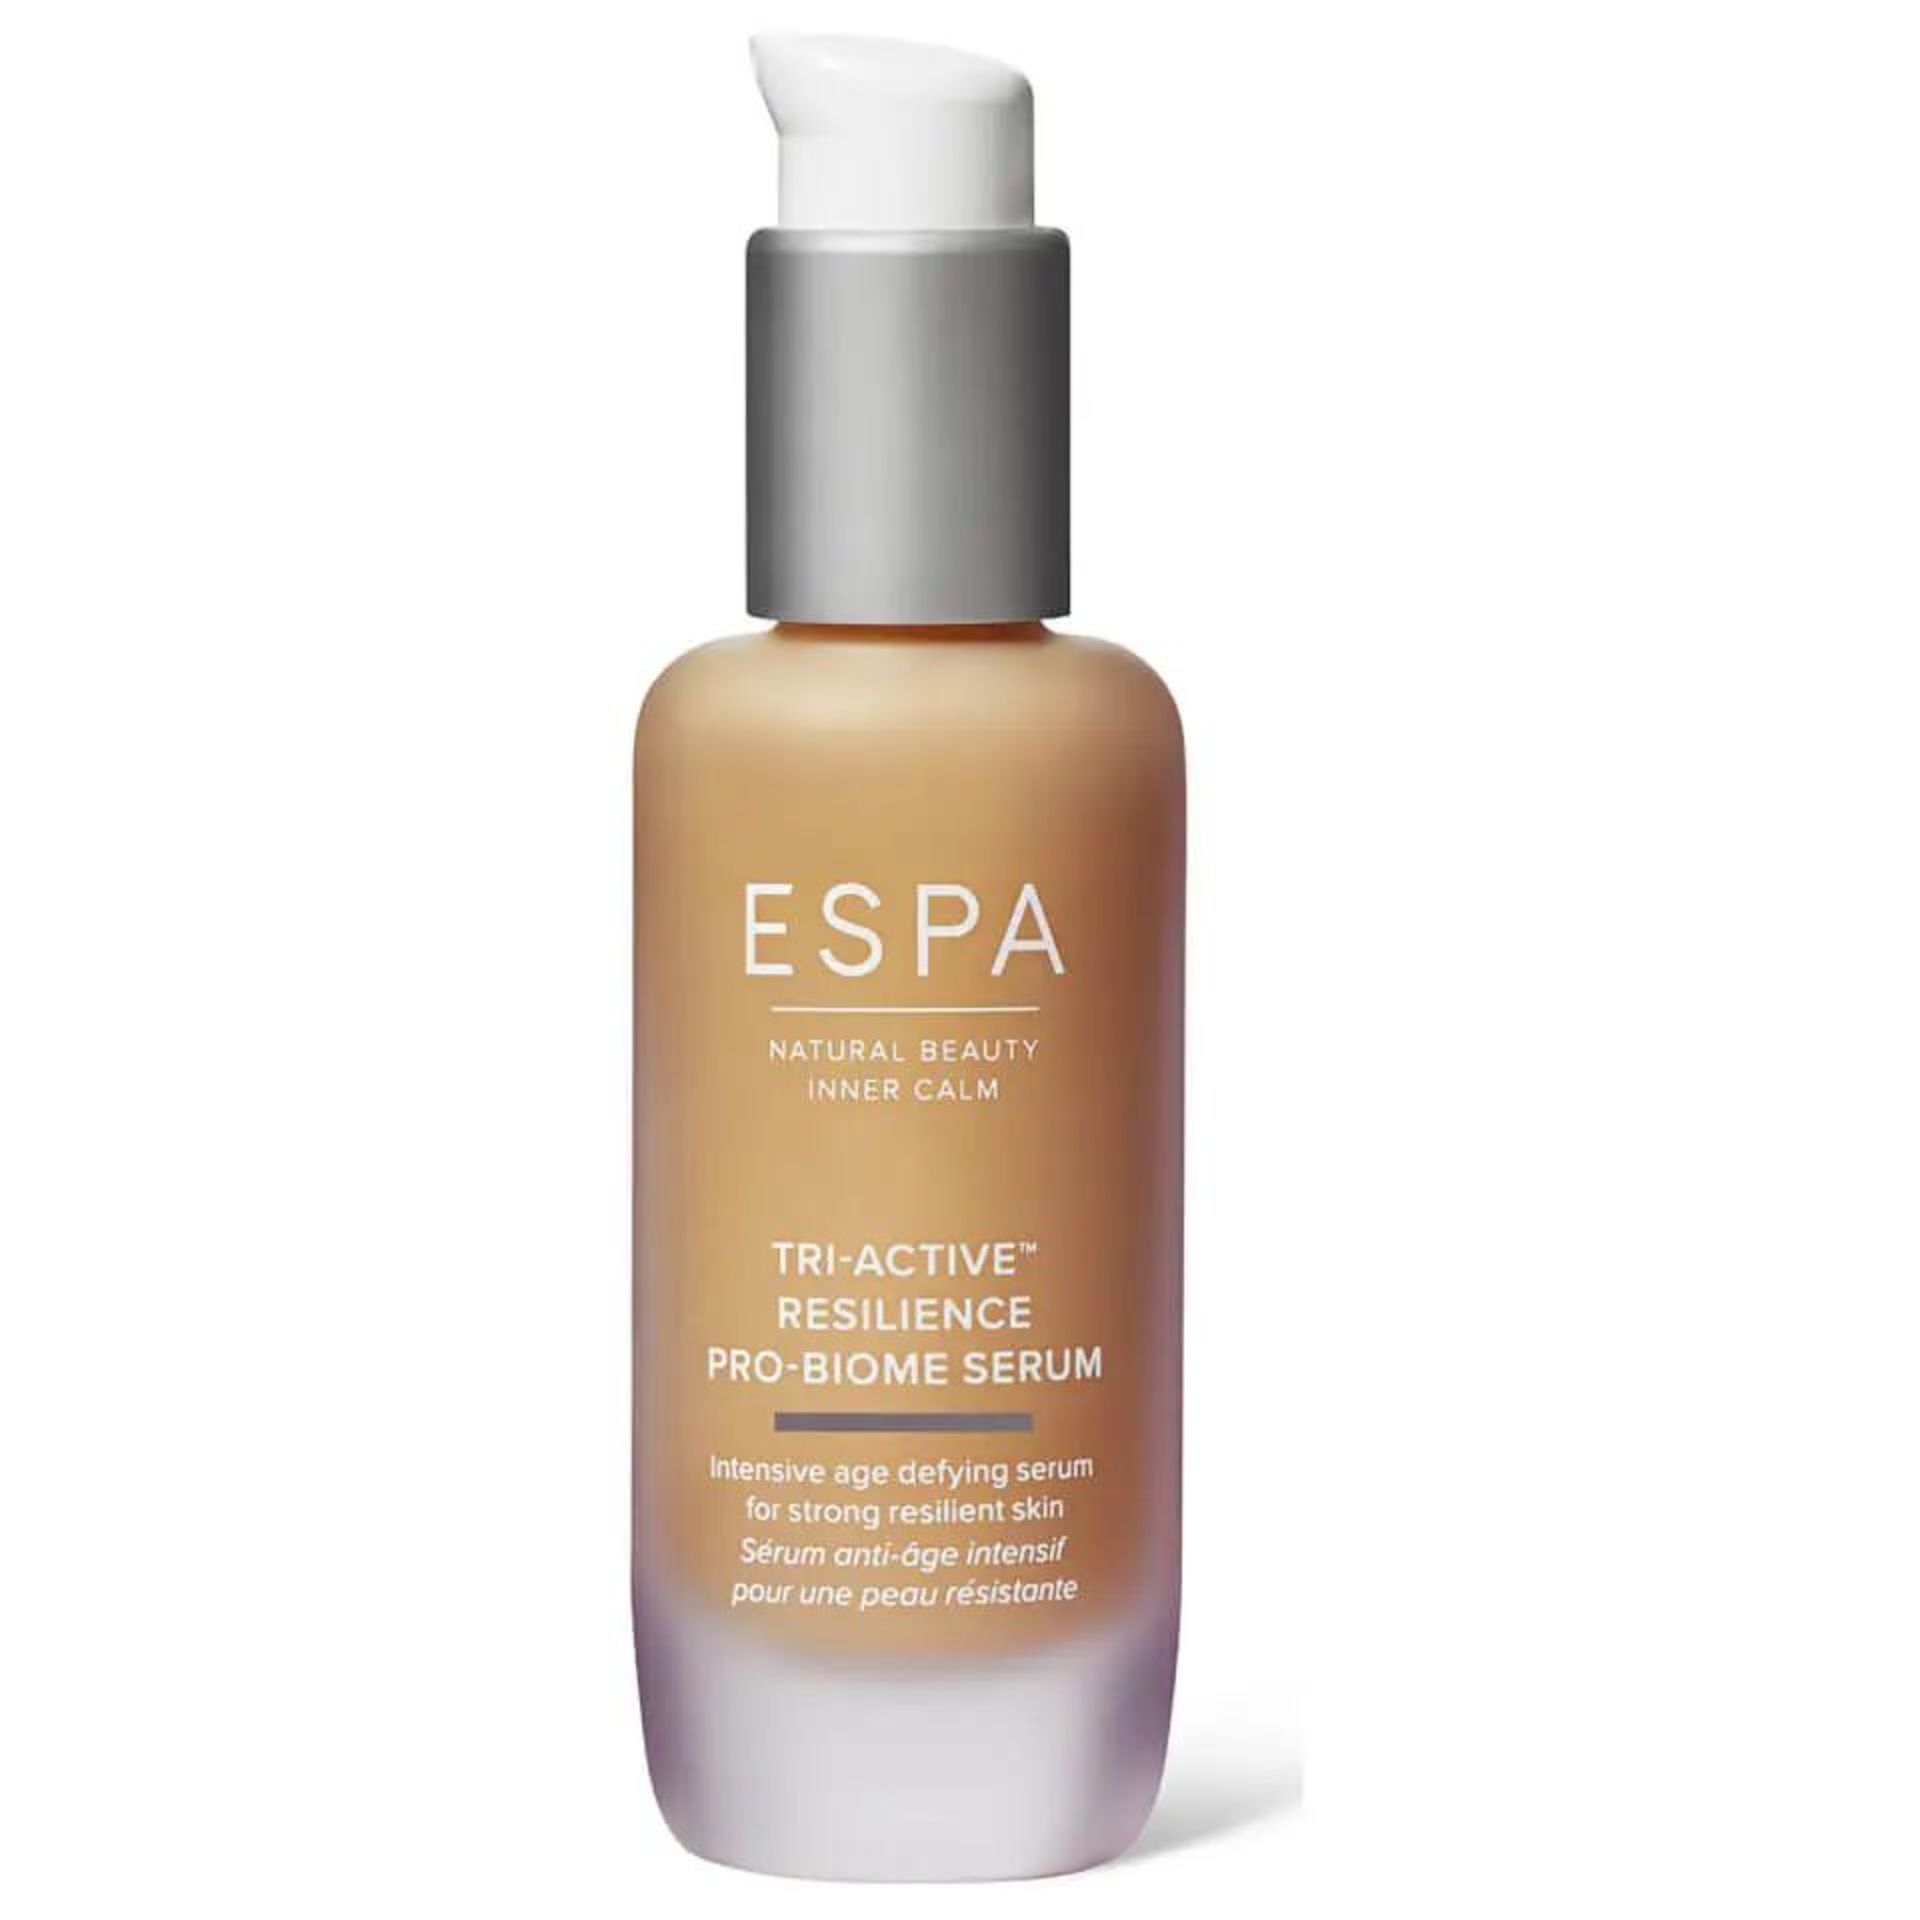 20x NEW ESPA Tri-Active Resilience Pro-Biome Serum 10ml. RRP £20 Each. (R12-13). A clinically proven